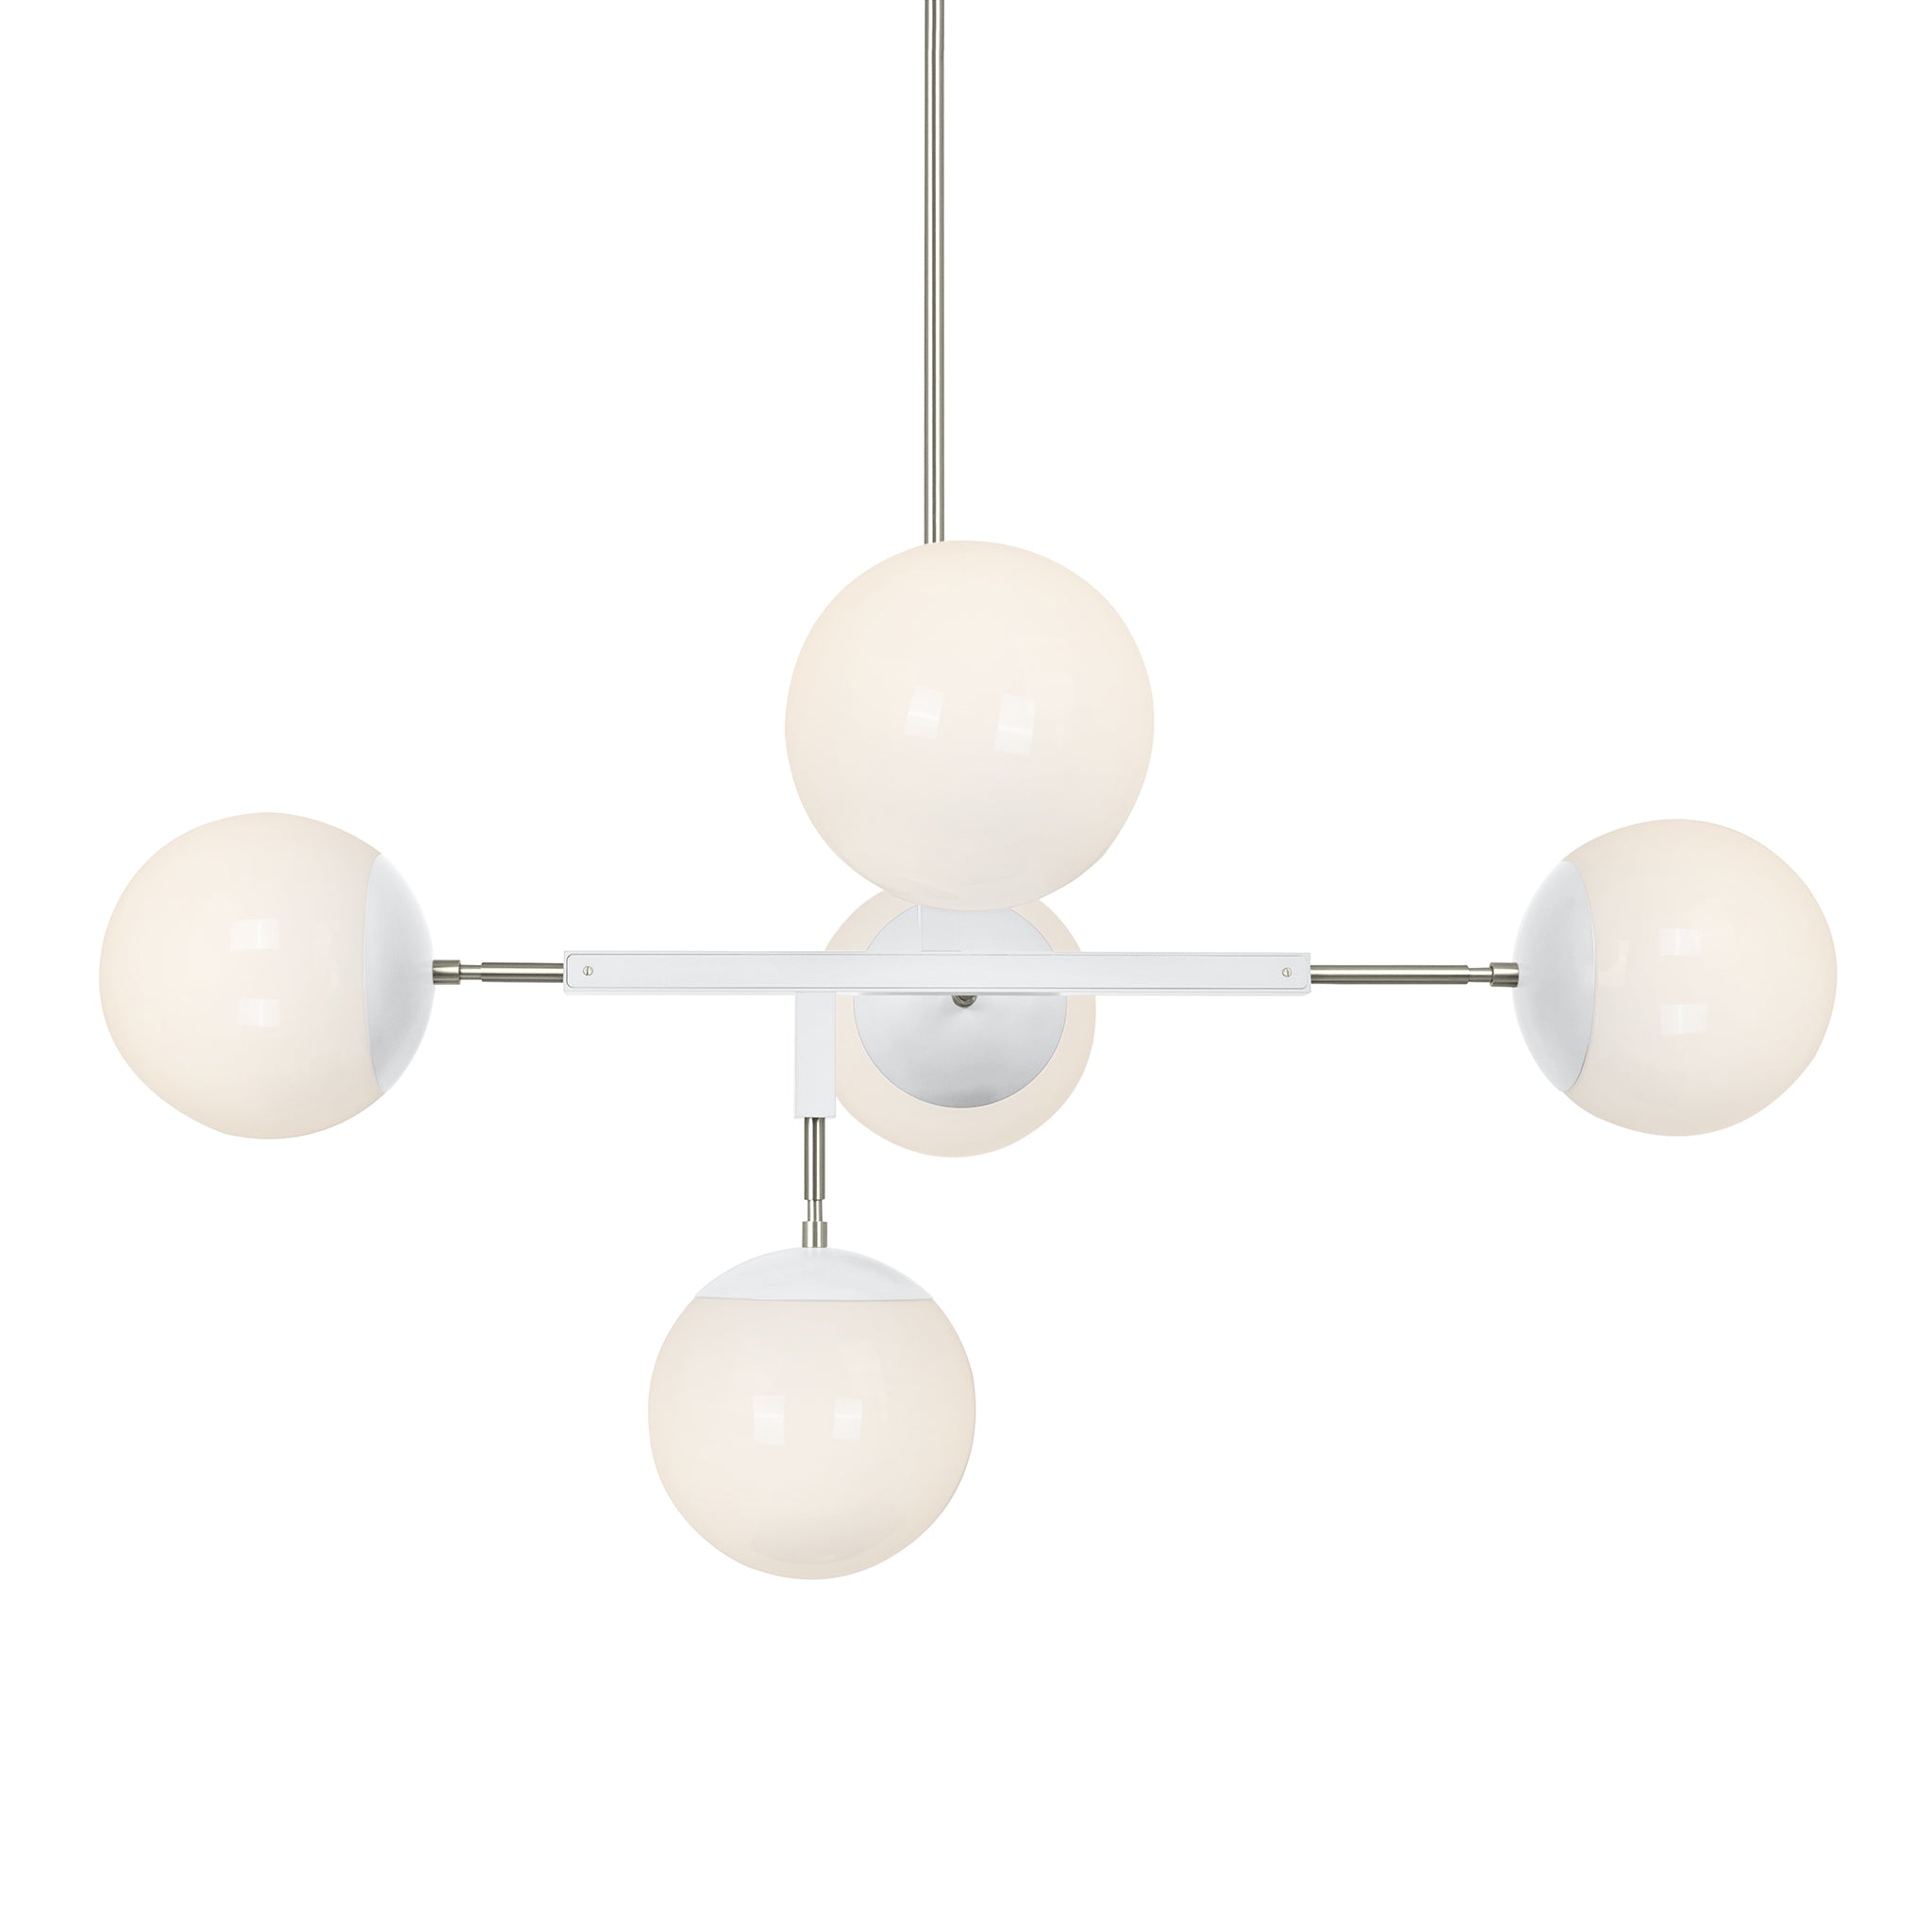 Nickel and white color Big Prisma chandelier 42" Dutton Brown lighting